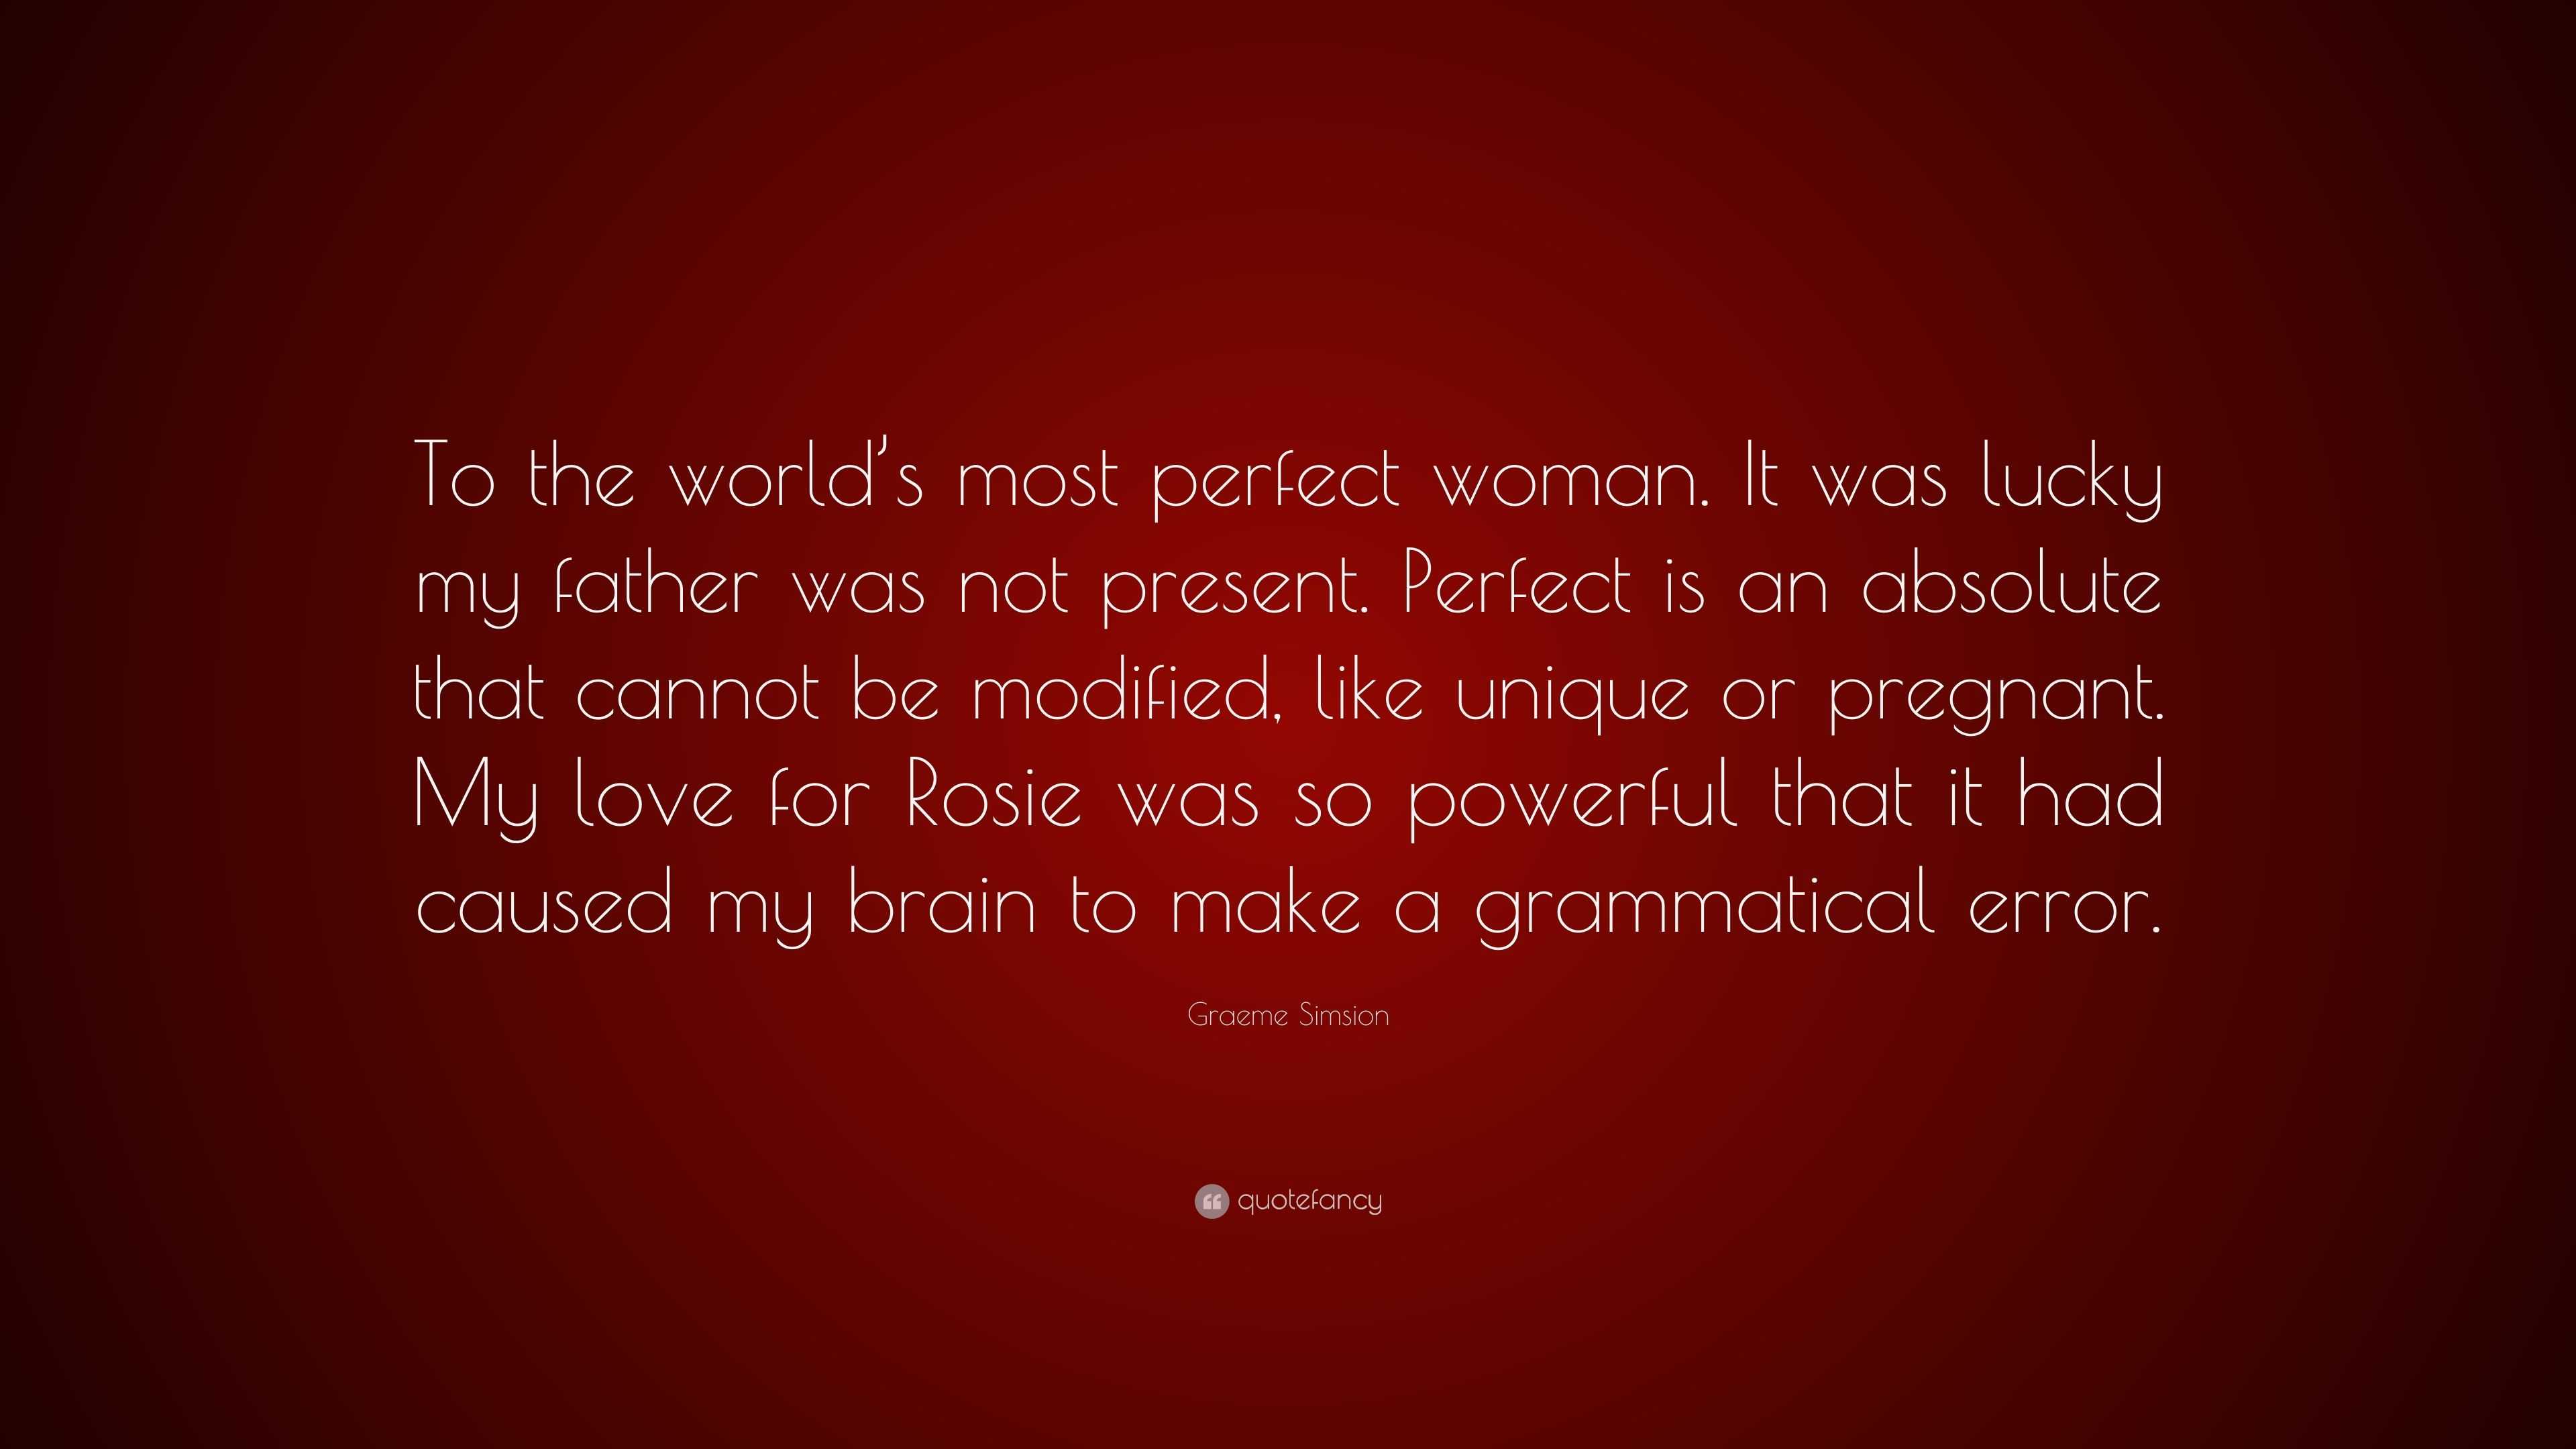 Graeme Simsion Quote “to The World’s Most Perfect Woman It Was Lucky My Father Was Not Present